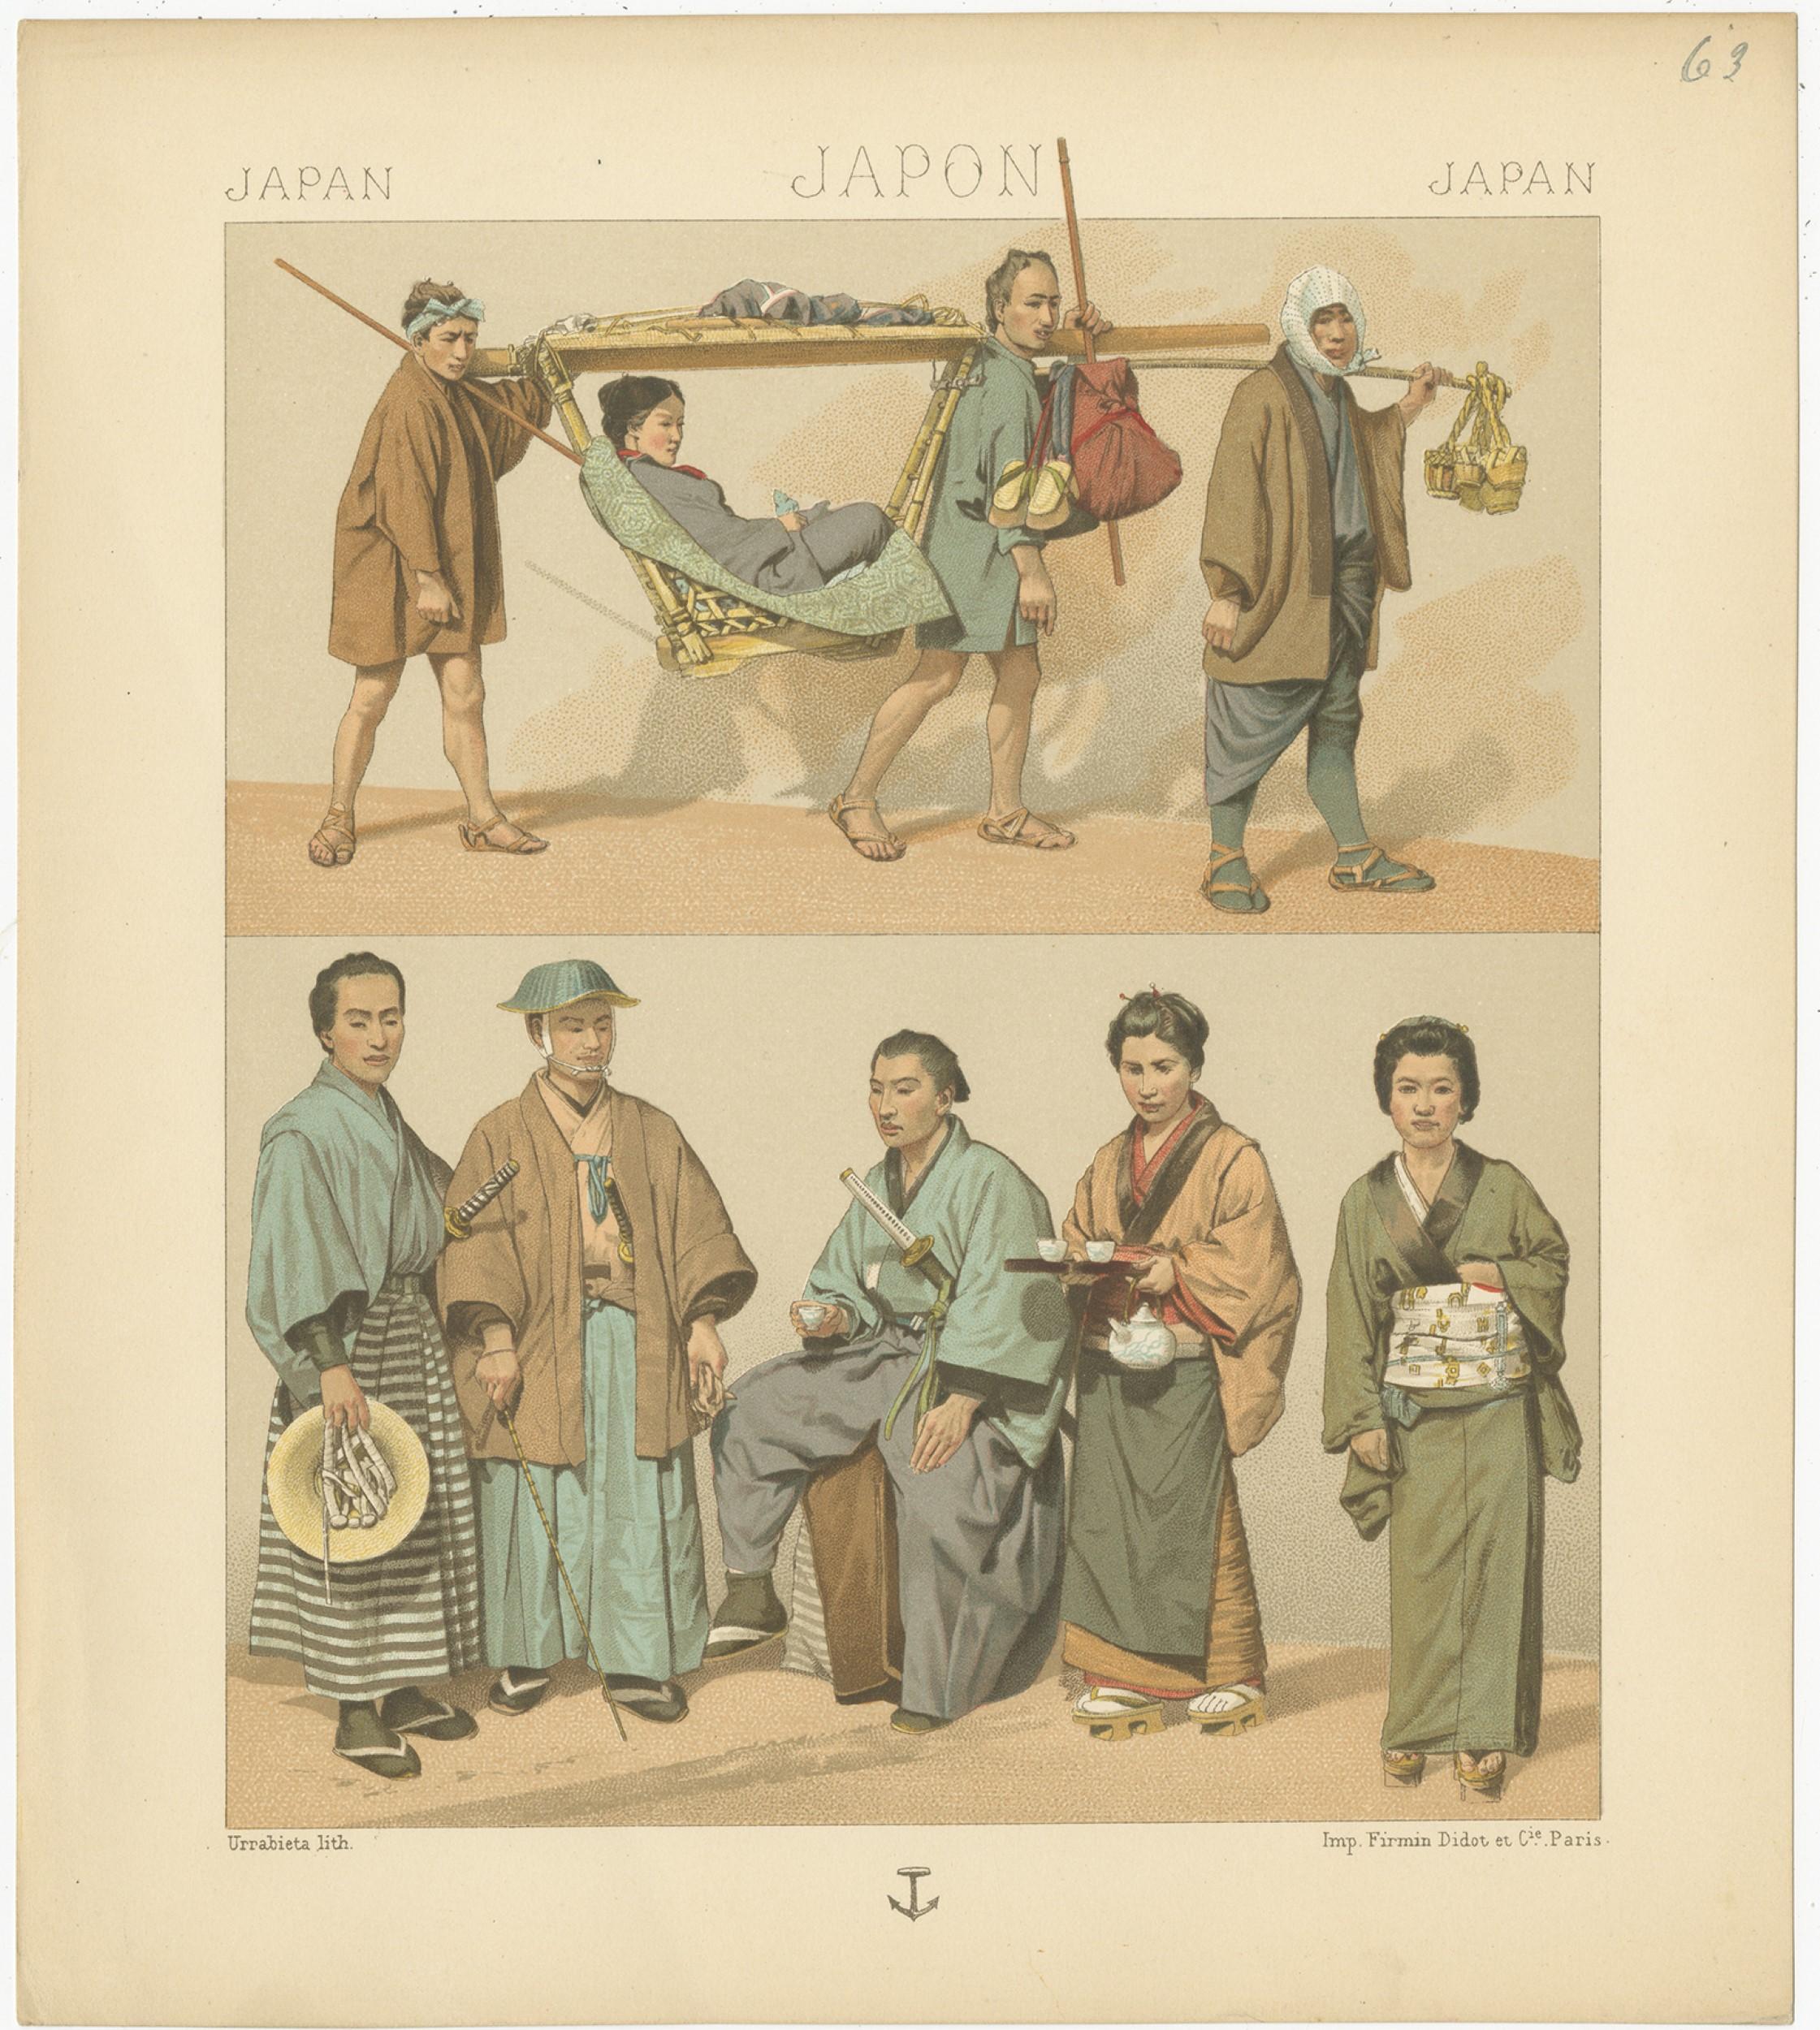 Antique print titled 'Japan - Japon - Japan'. Chromolithograph of Japanese Costumes. This print originates from 'Le Costume Historique' by M.A. Racinet. Published, circa 1880.